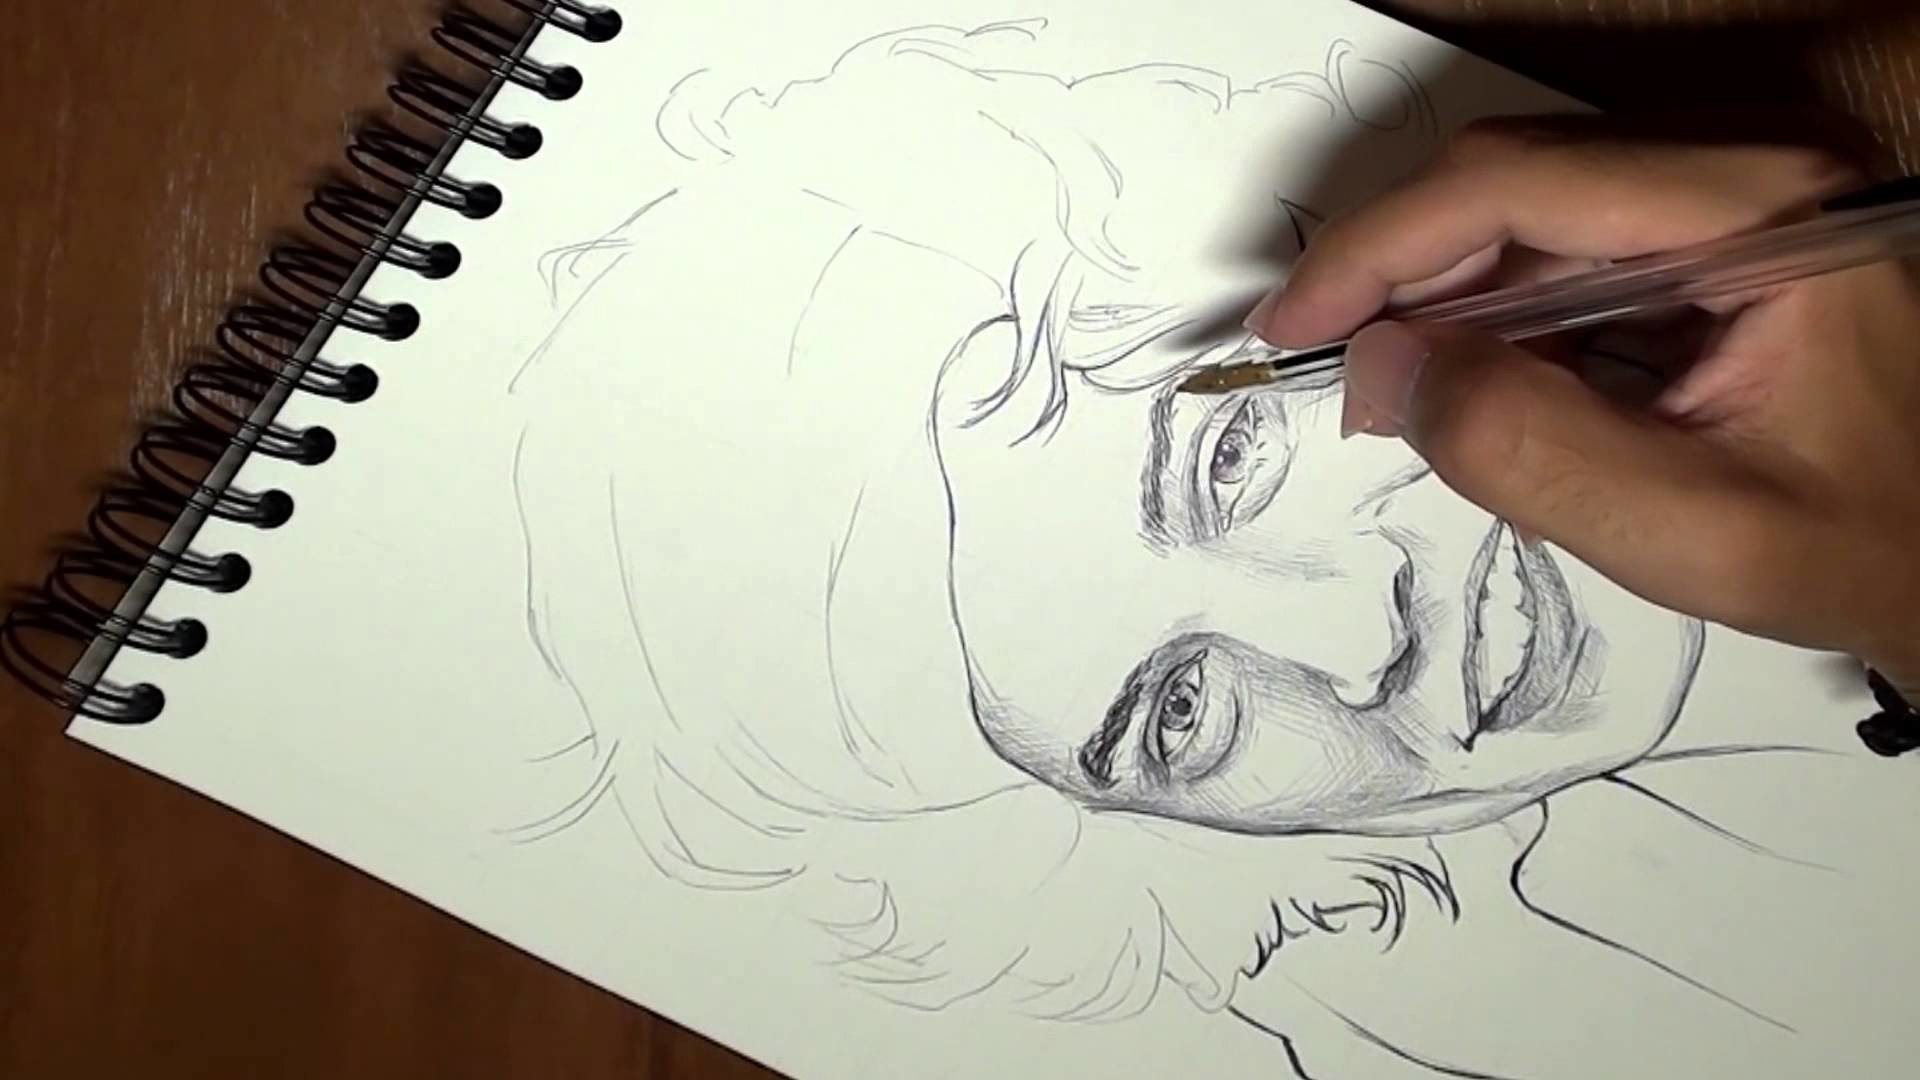 Cómo dibujar a Harry Styles en 3 minutos timelapse (How to draw Harry Styles in 3 minutes)